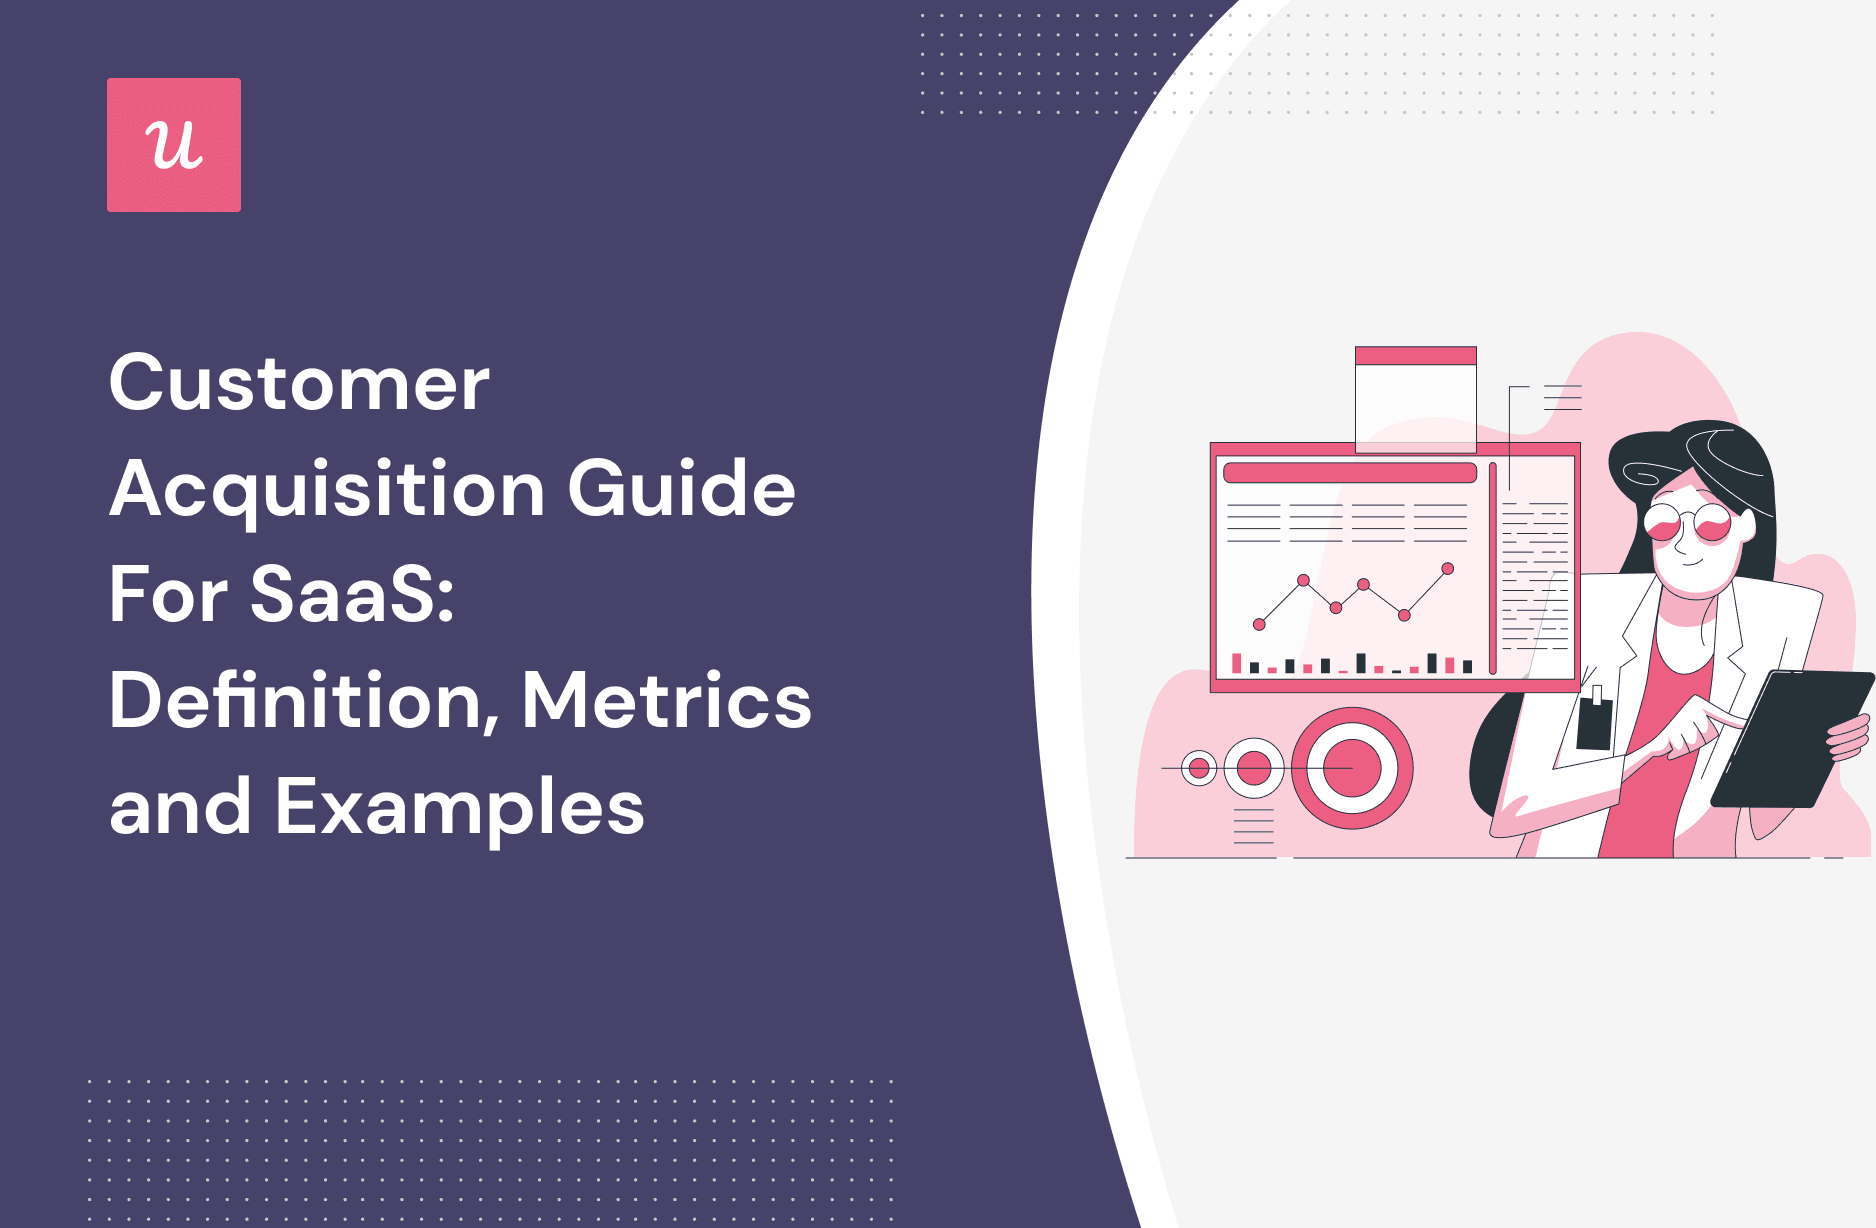 Customer Acquisition Guide For SaaS: Definition, Metrics and Examples cover